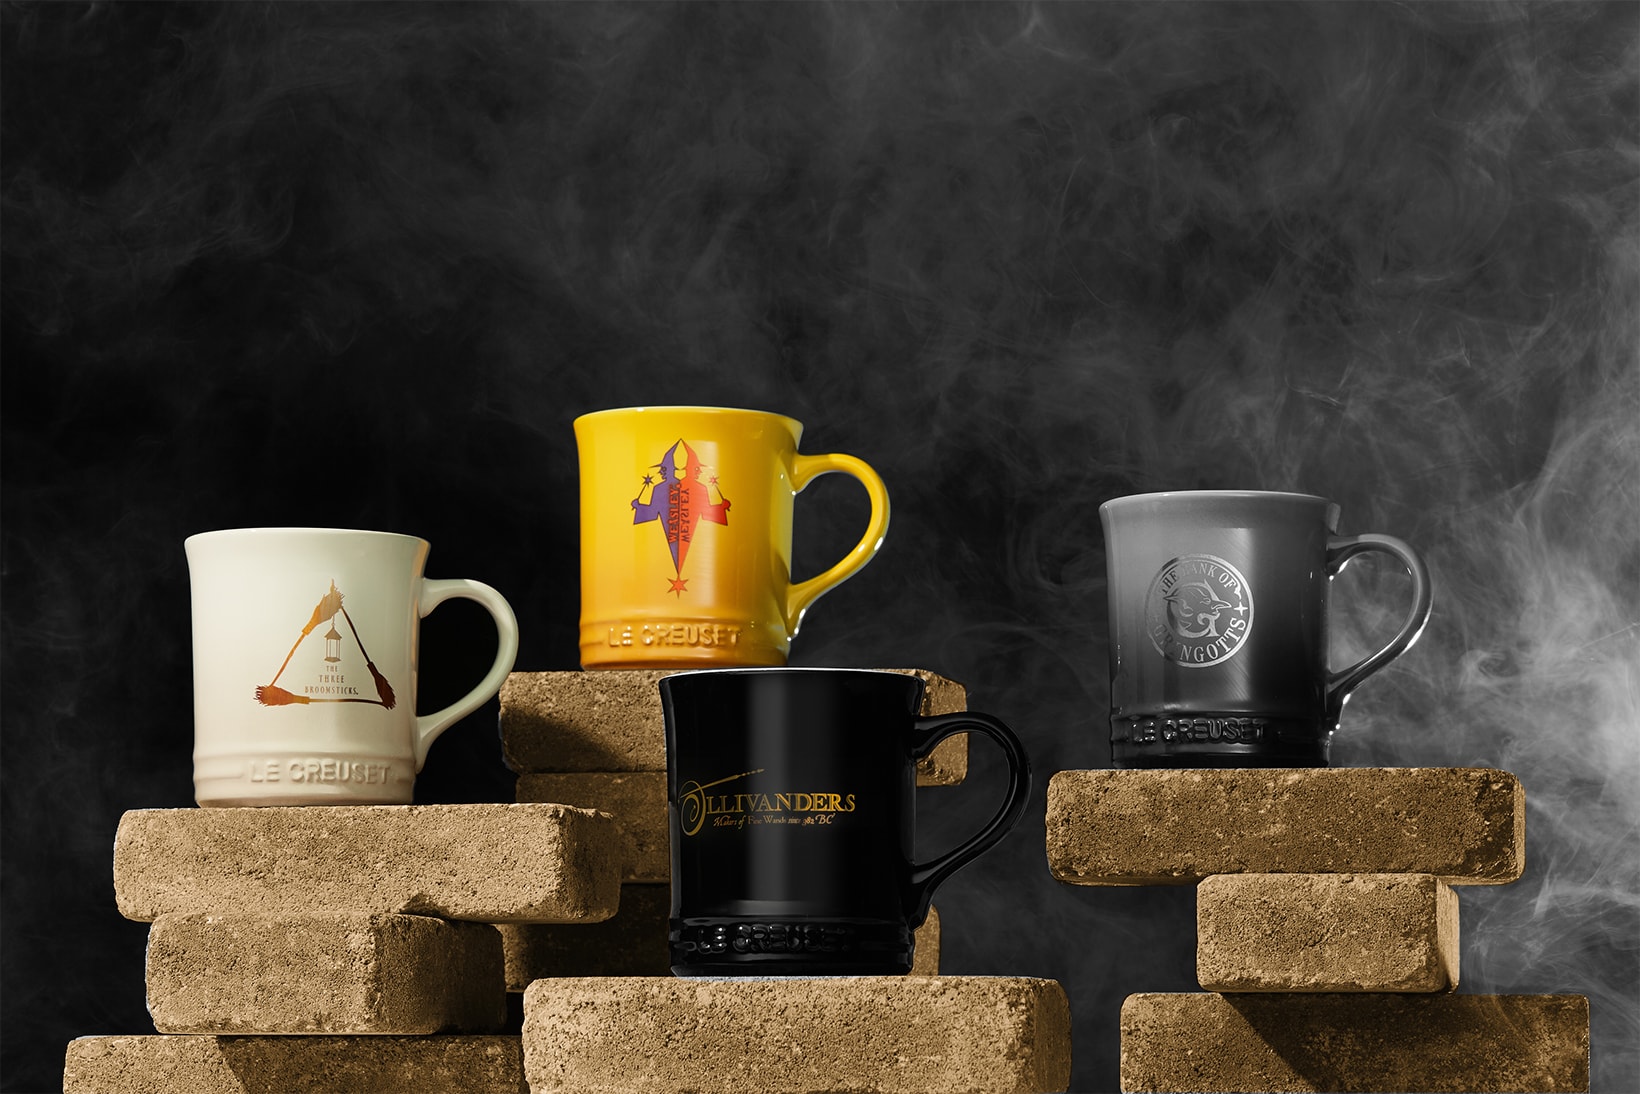 Le Creuset Harry Potter Kitchenware Collaboration Collection mugs